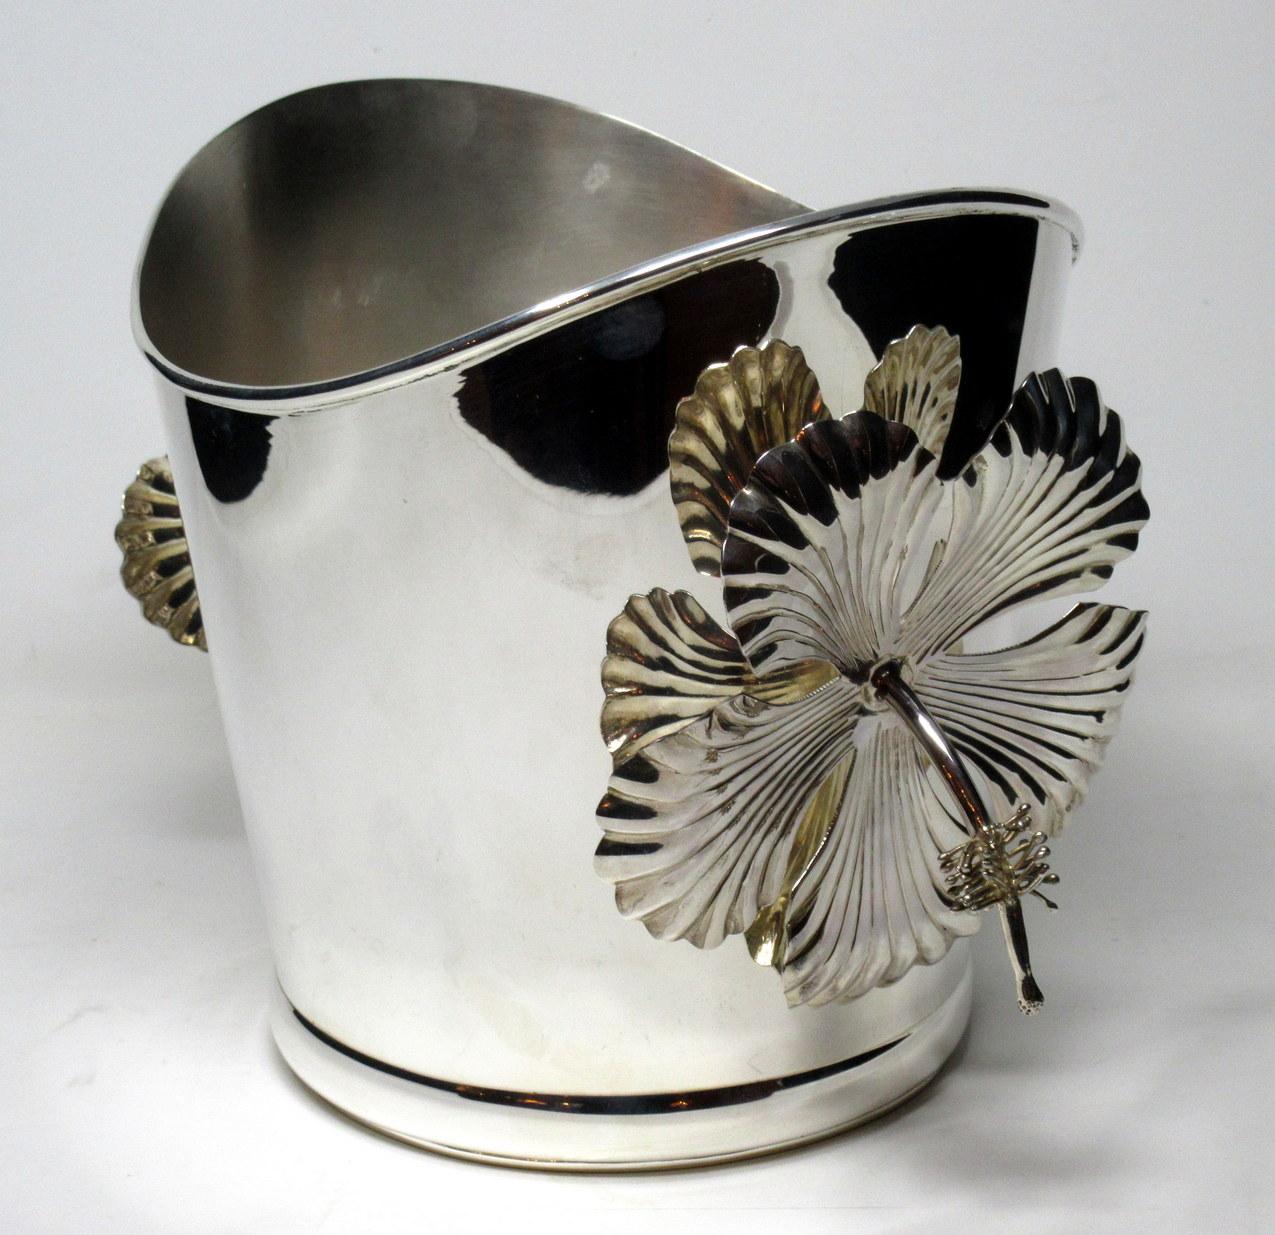 Impressive heavy gauge sterling silver Champagne or wine cooler of outstanding quality and generous size, mid-20th century, of continental origin. Complete with its original silk covered casket.

Of traditional form, with twin handles modeled as